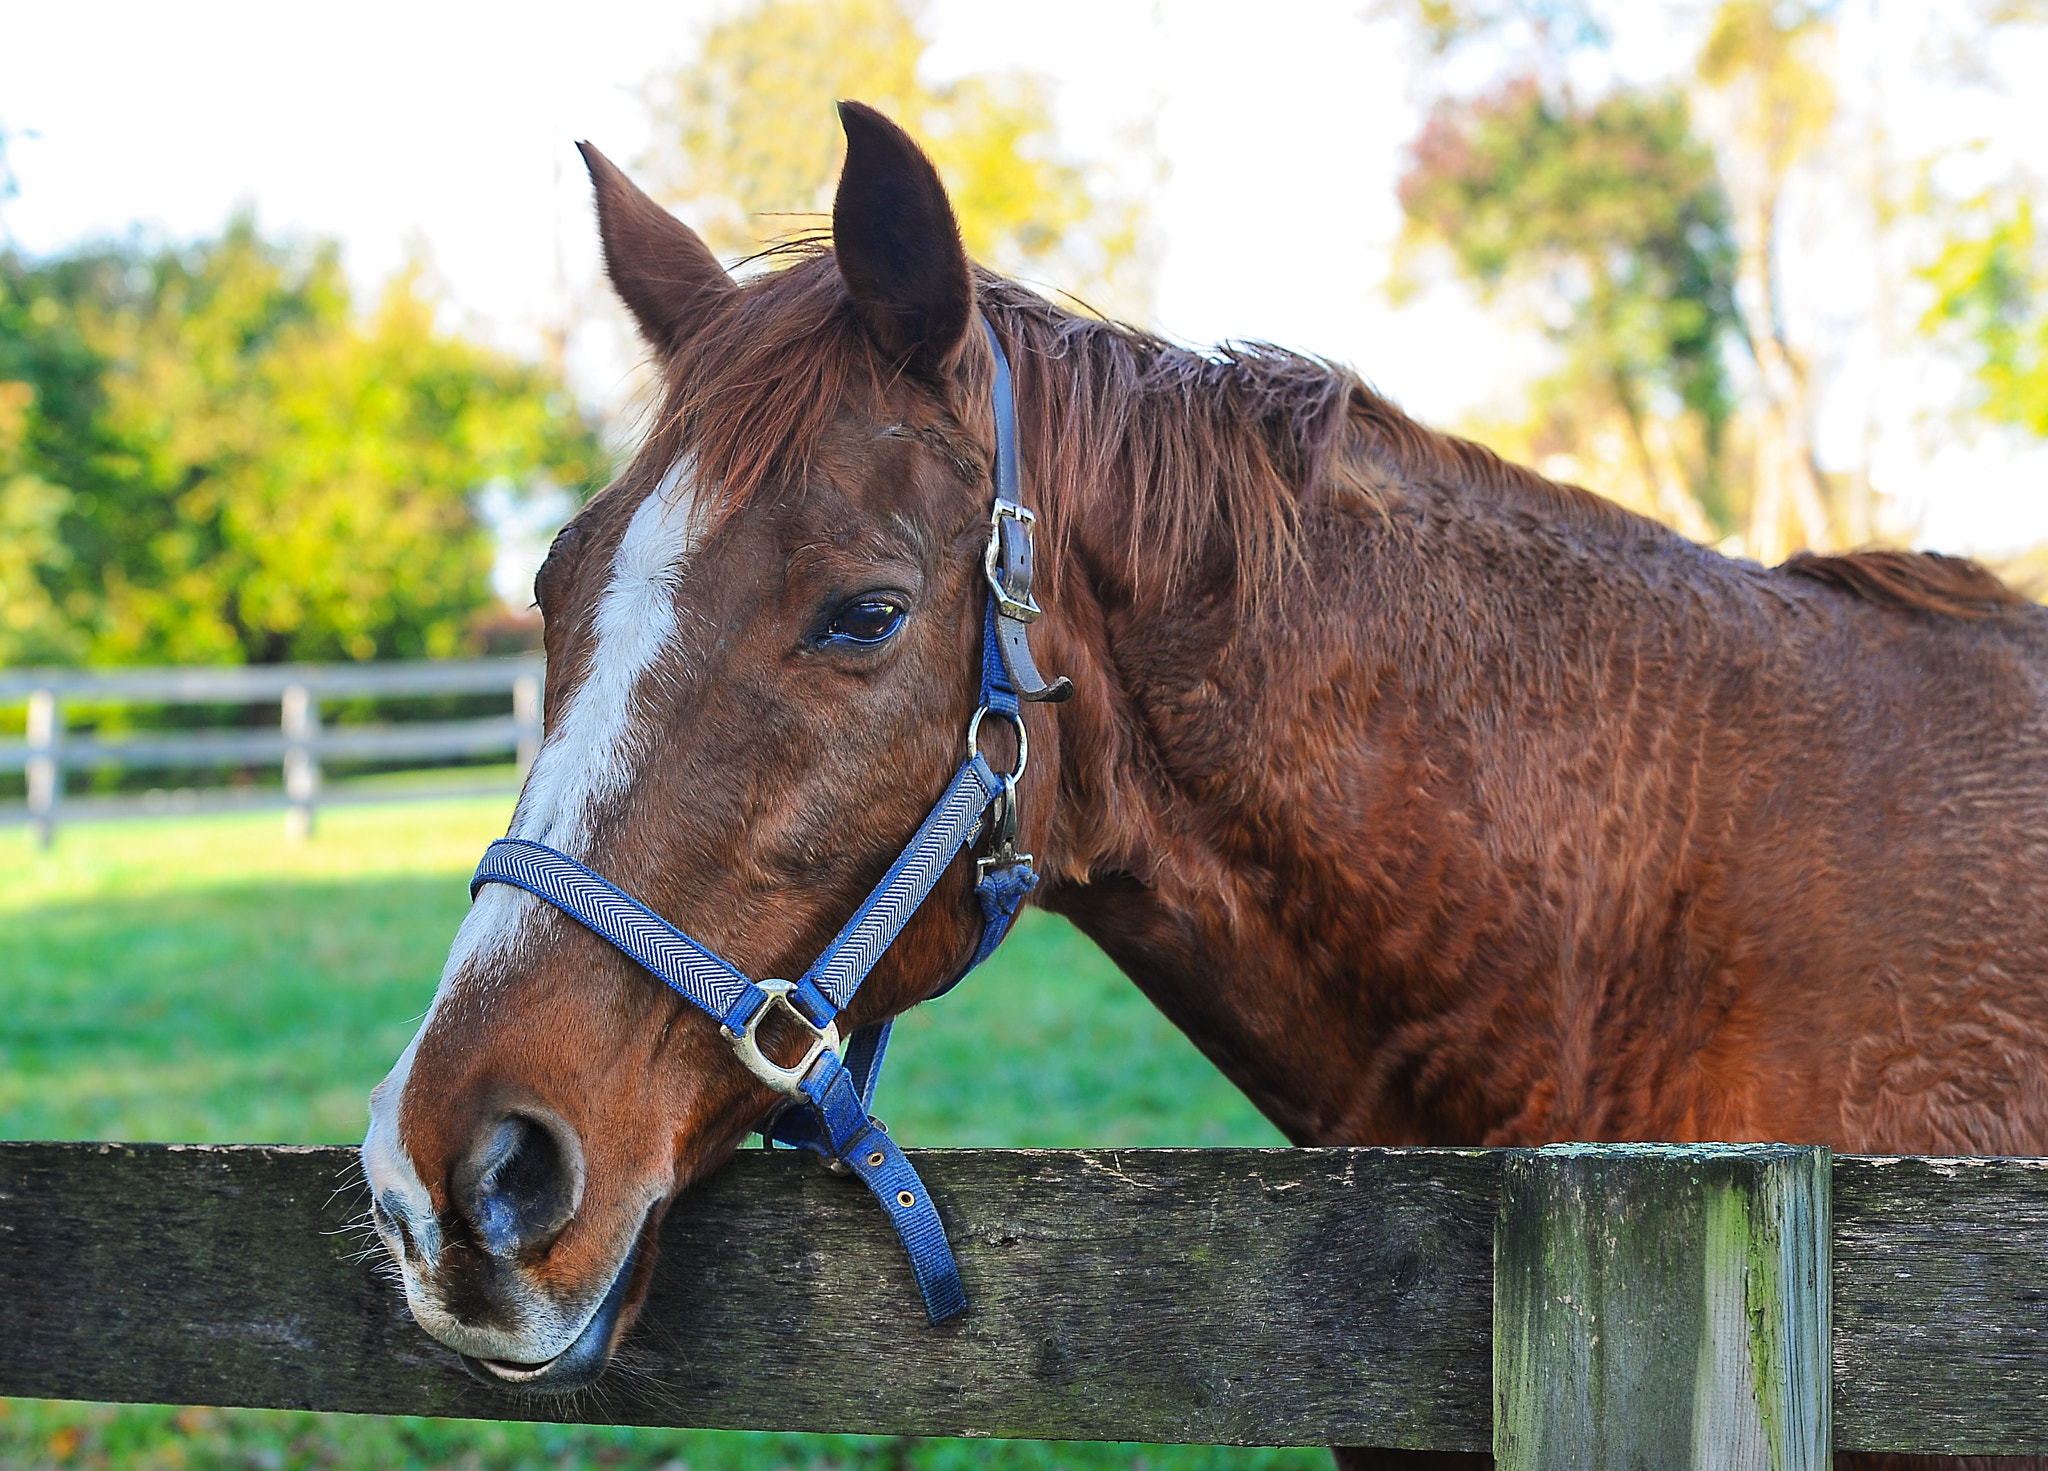 Nikon D3 sample photo. Horse at the fence photography